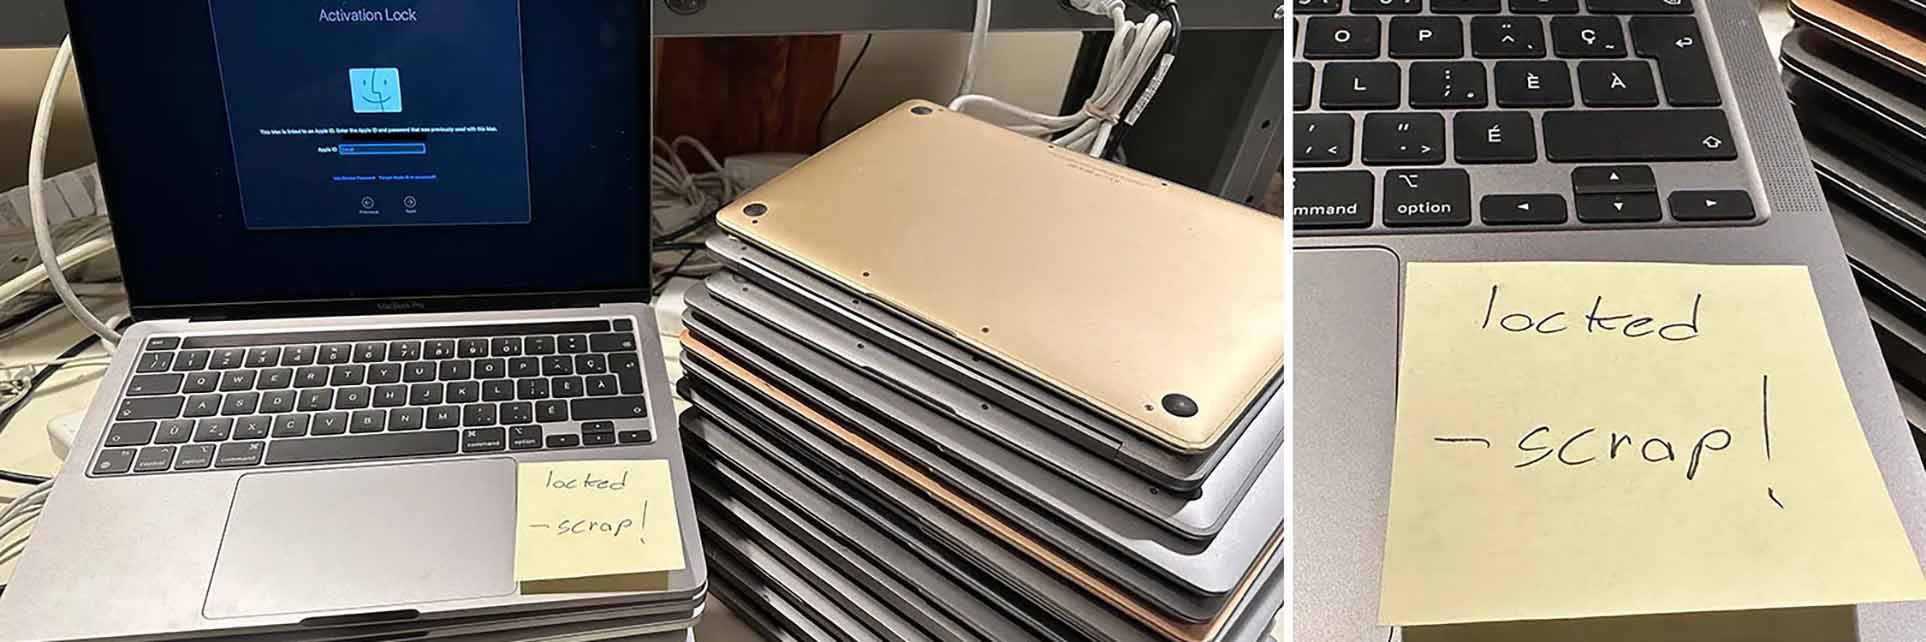 Working Macbooks Trashed Over Activation Lock